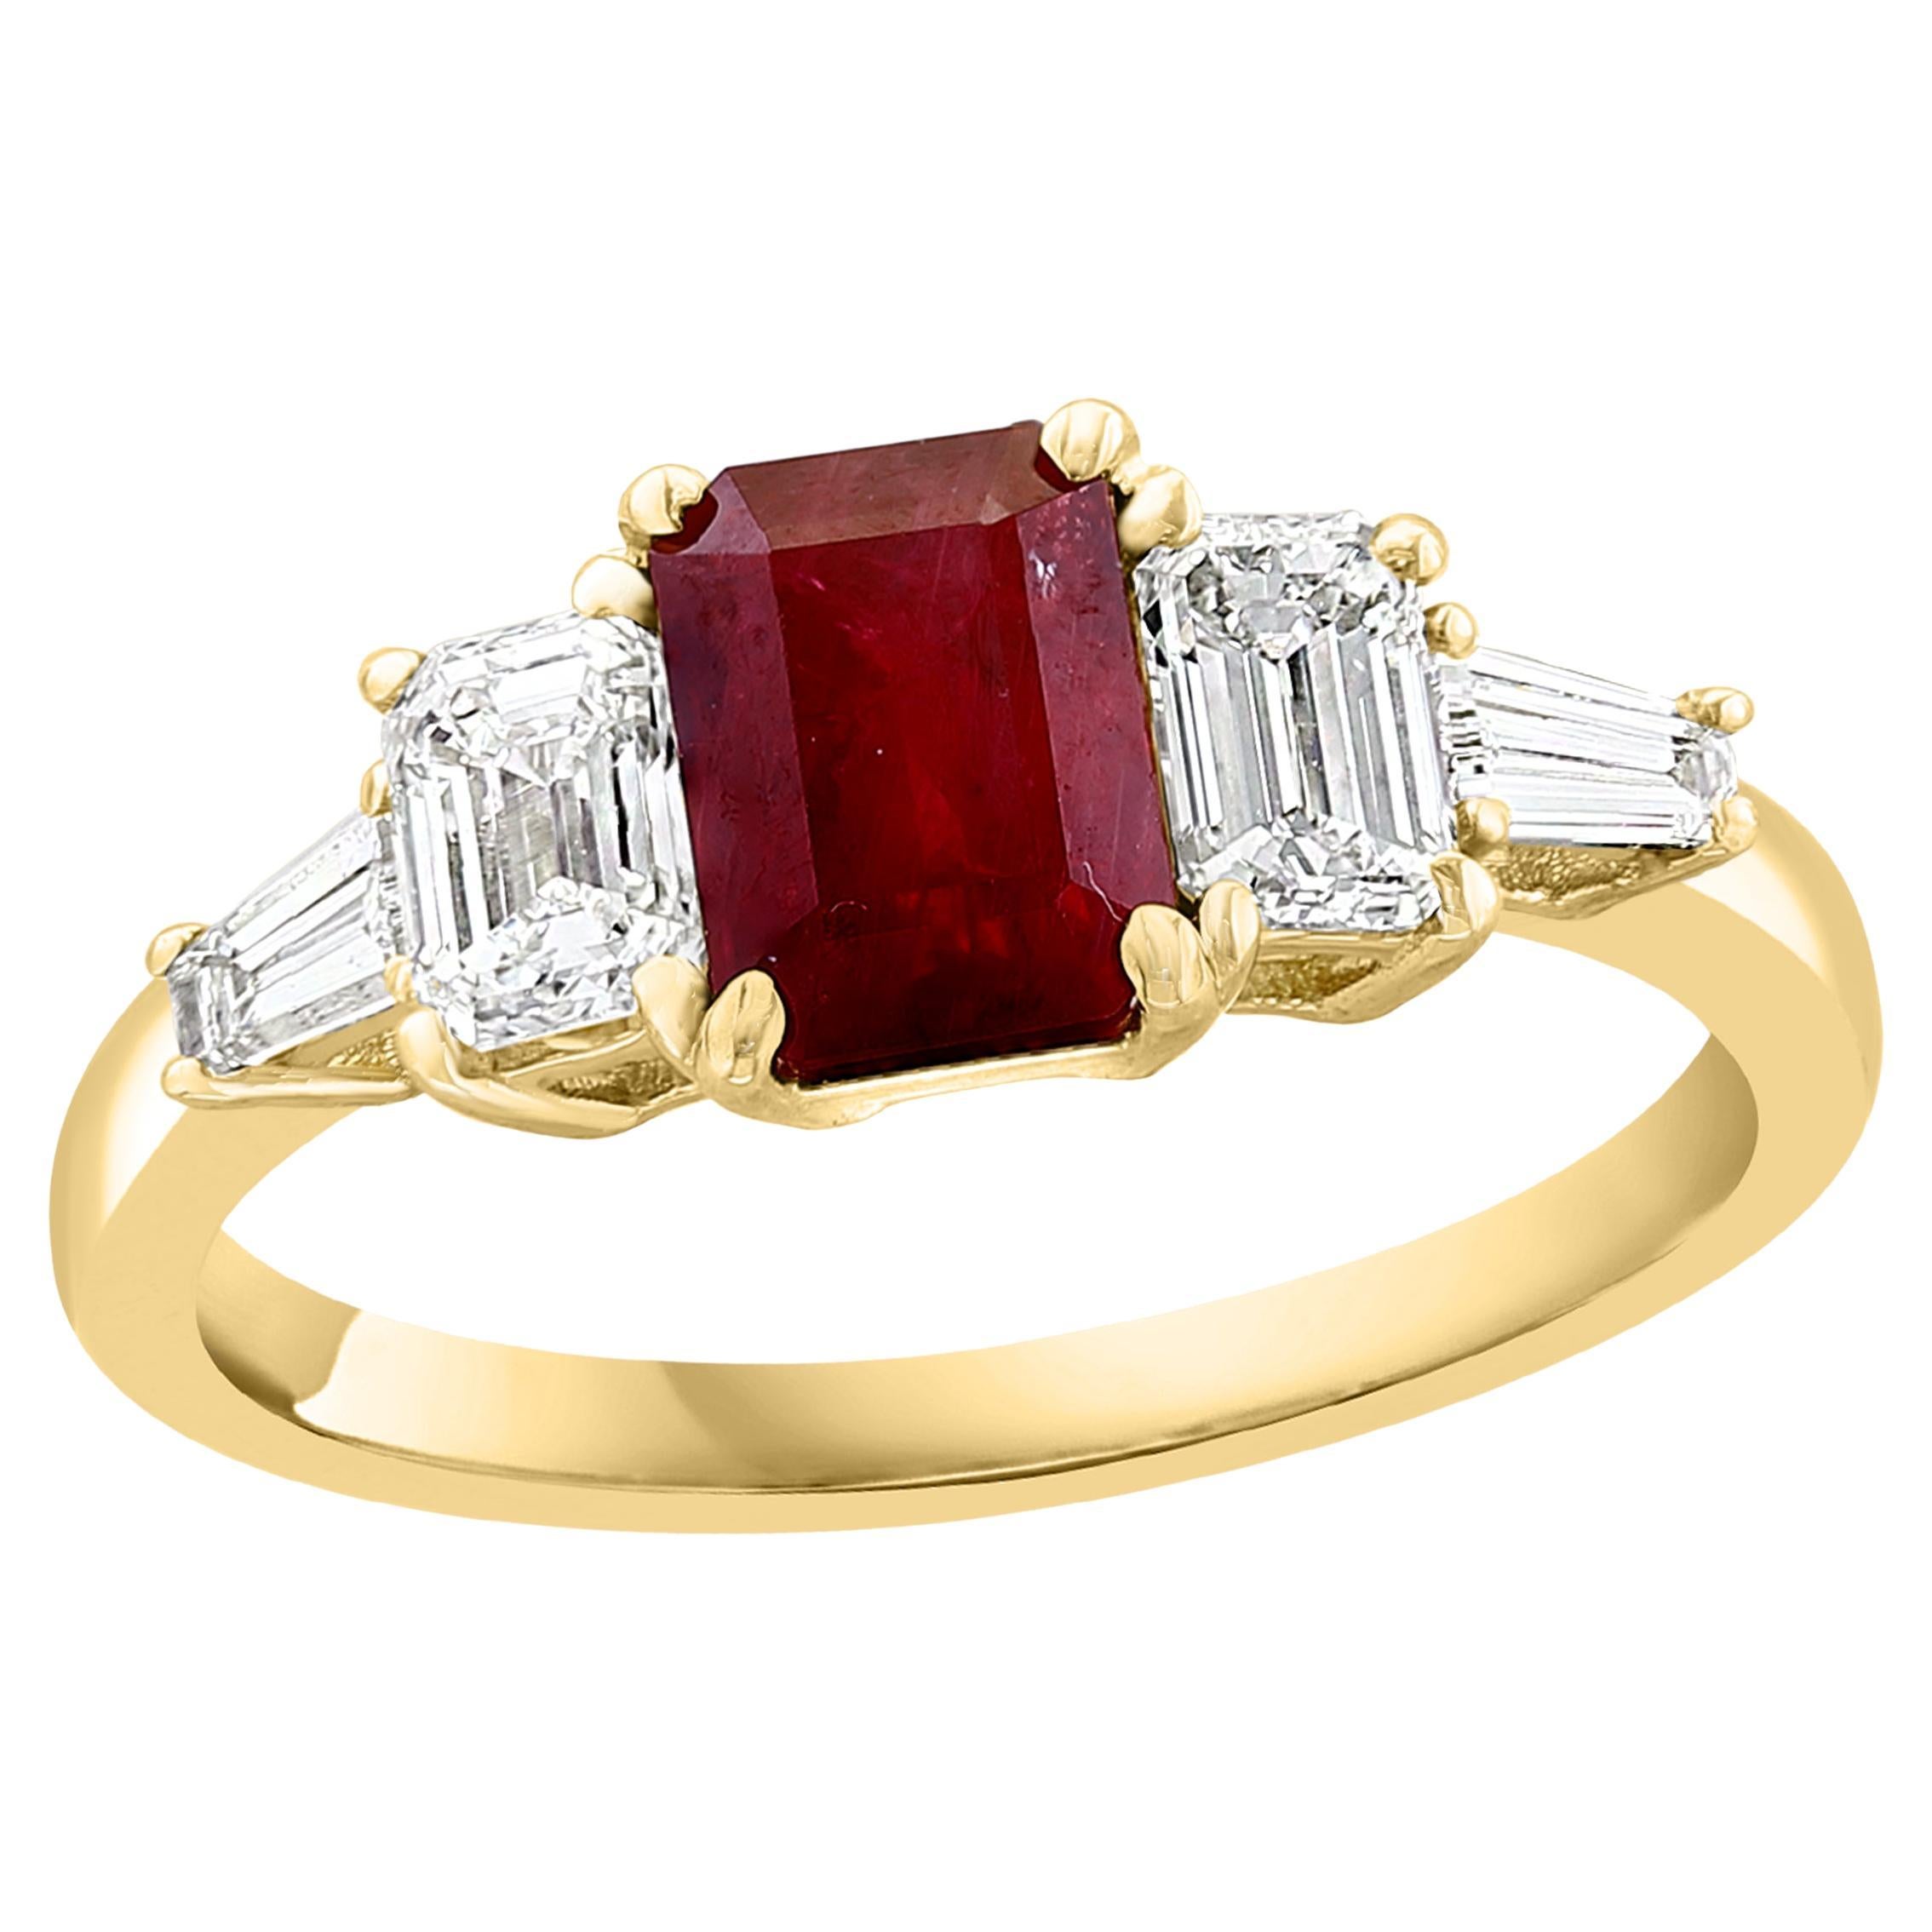 1.04 Carat Emerald Cut Ruby and Diamond 5 Stone Ring in 14K Yellow Gold For Sale